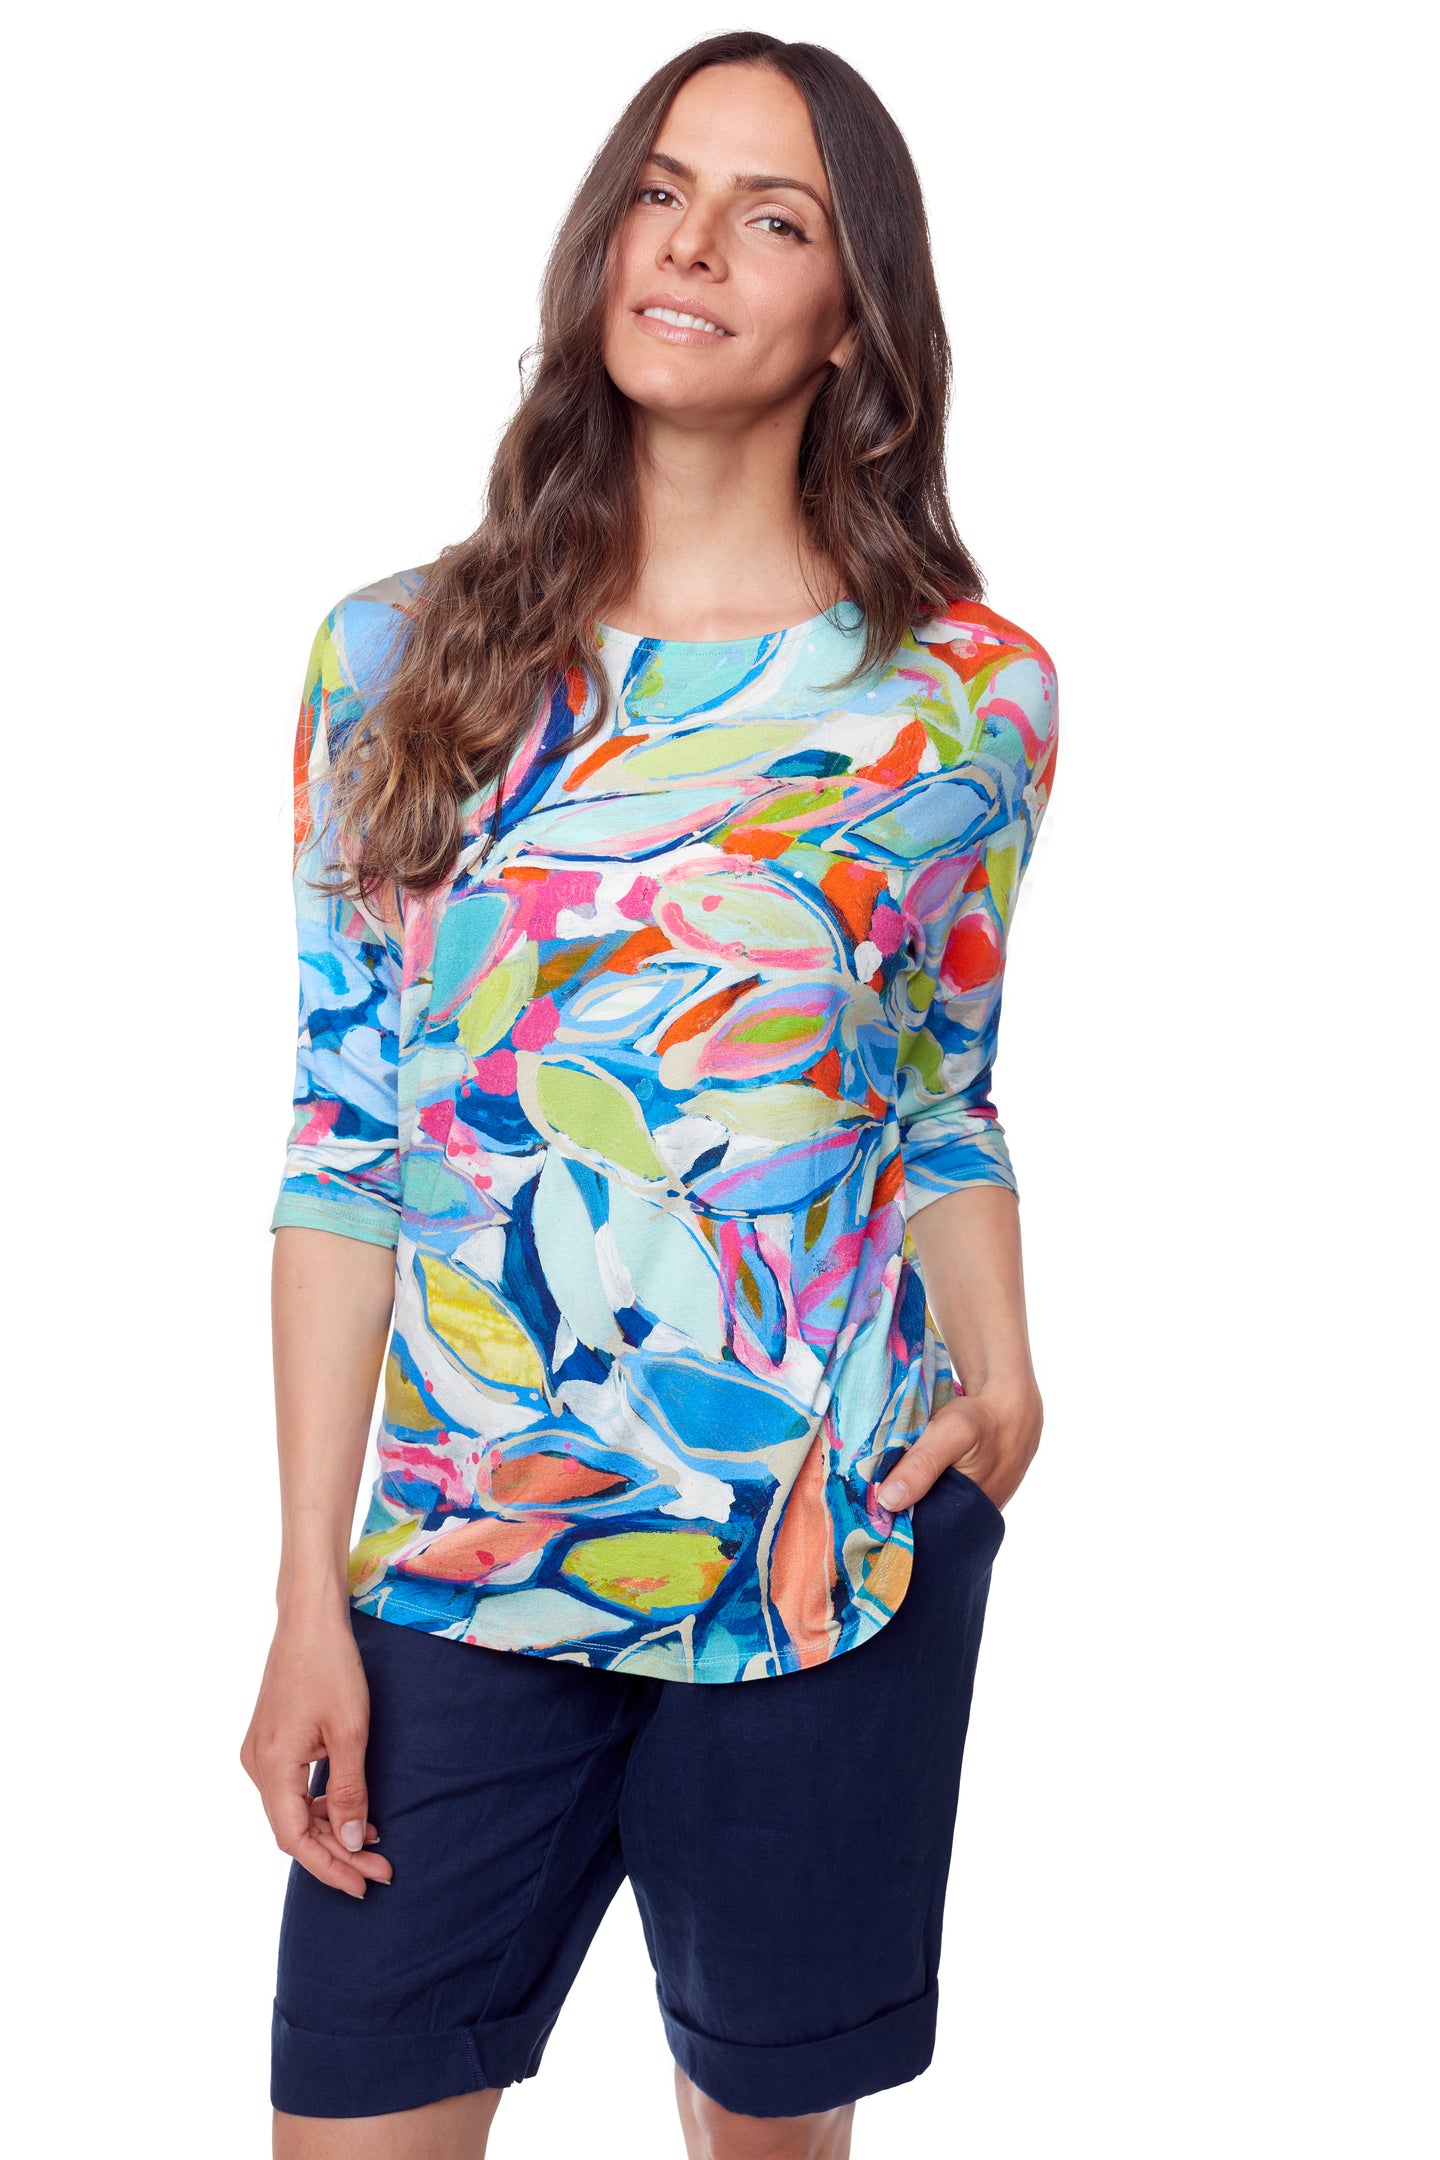 Party In August 3/4-length dolman sleeve top